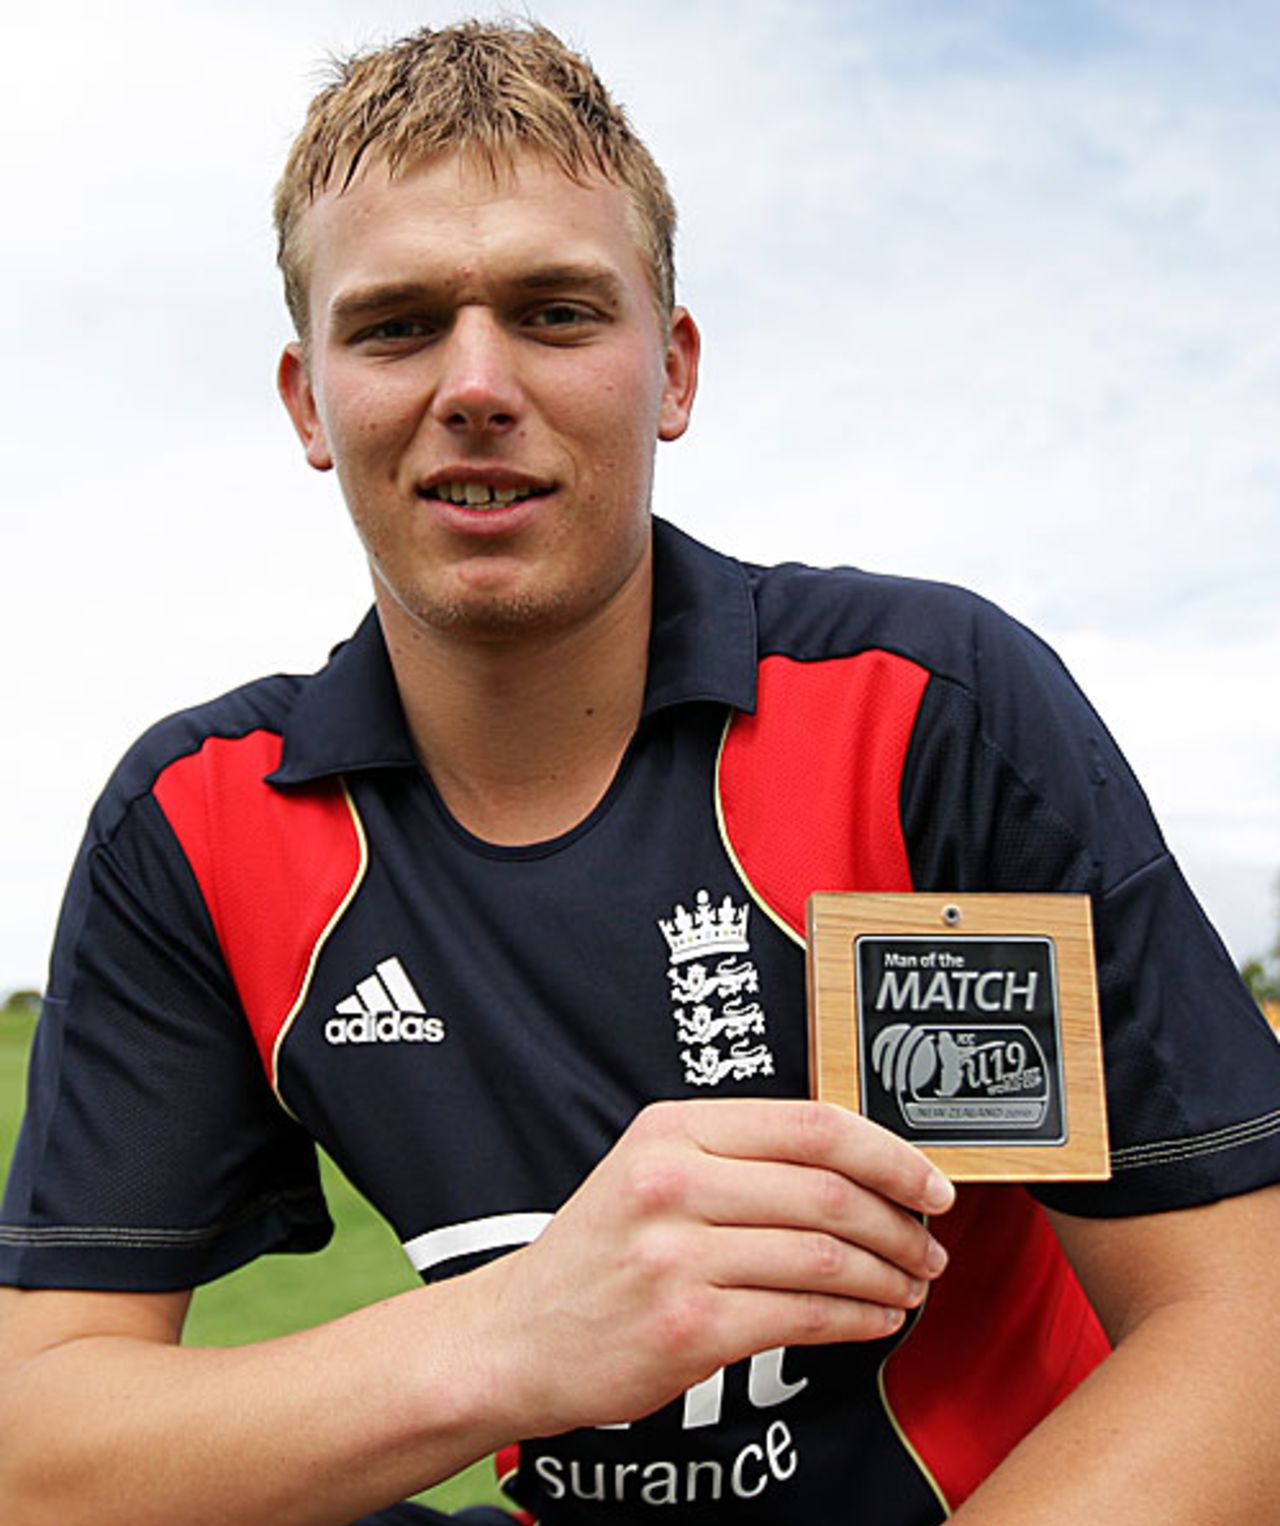 Danny Briggs was the Man of the Match for taking 3 for 15, Afghanistan Under-19s v England Under-19s, 13th Match, Group A, ICC Under-19 World Cup, Christchurch, January 18, 2010